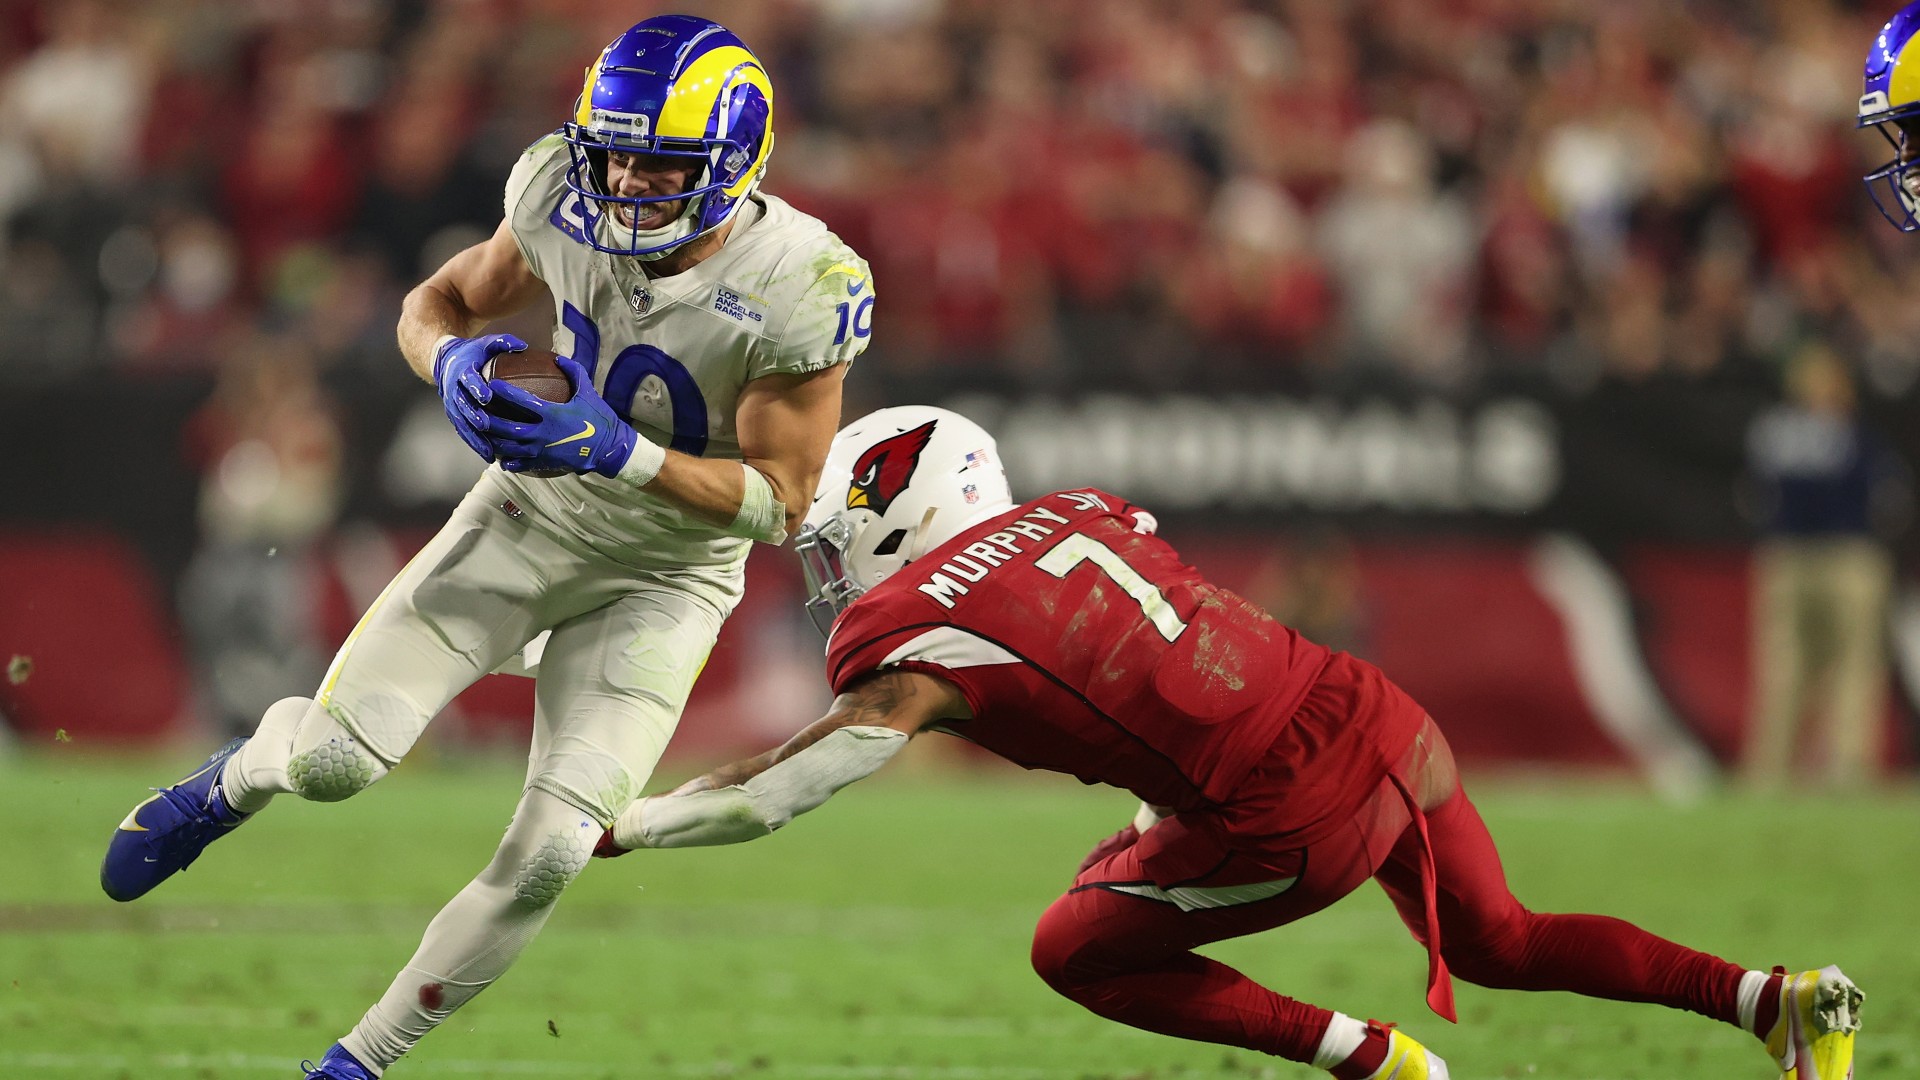 Cardinals will face Rams in Los Angeles in NFC Wild Card game